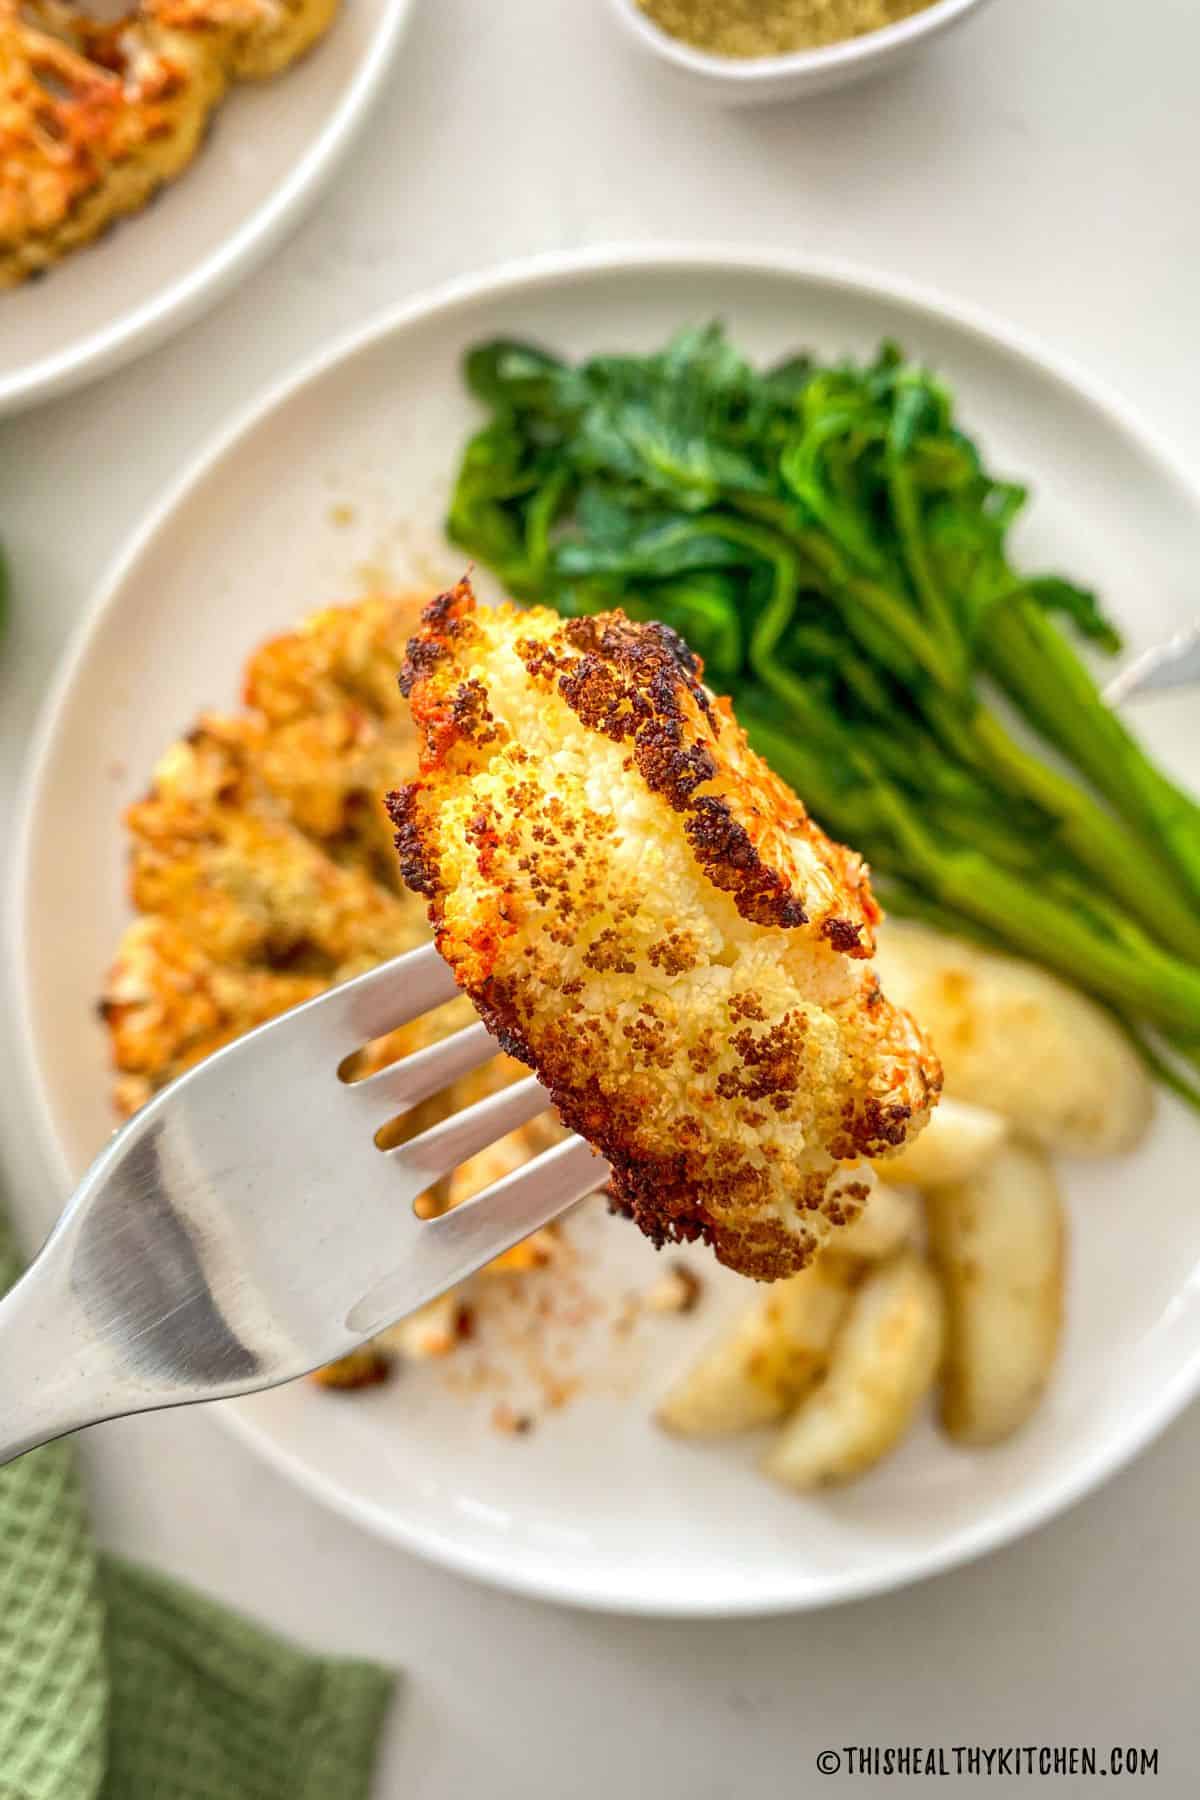 Bite of cauliflower steak on fork with remaining in plate below.